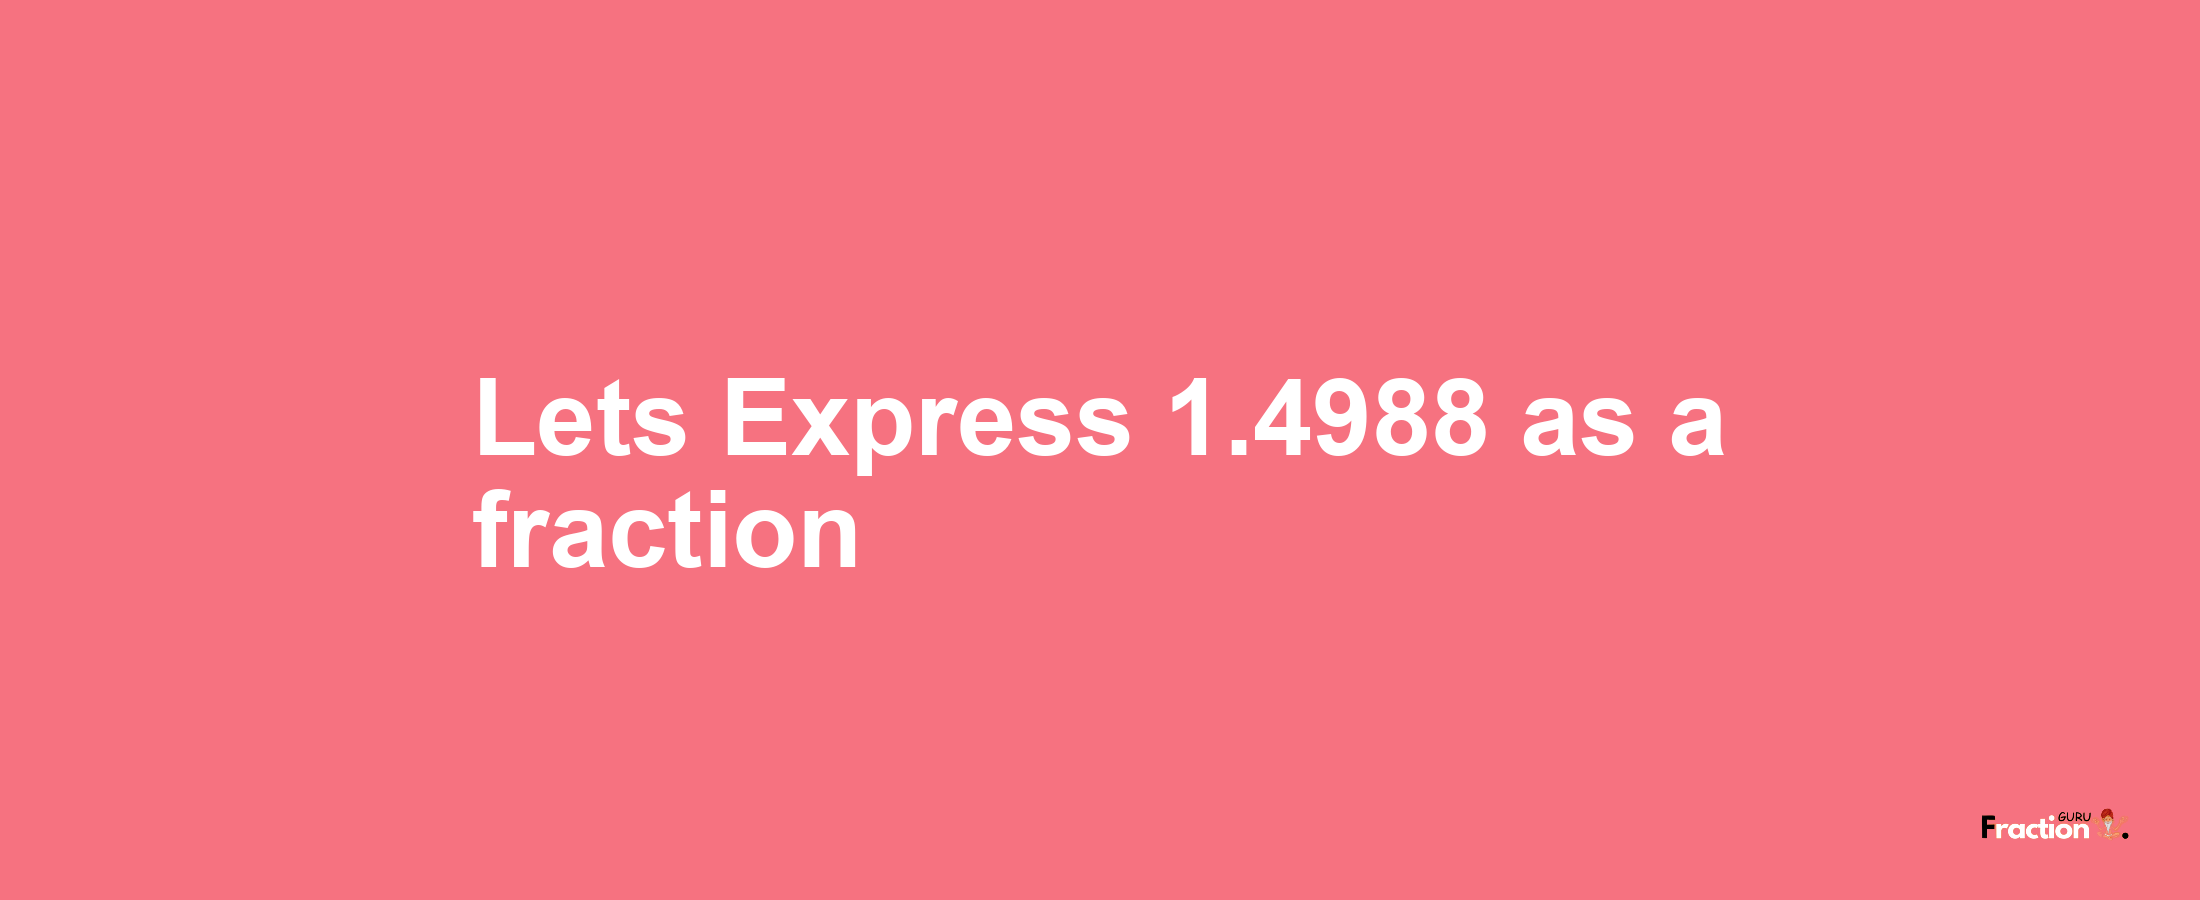 Lets Express 1.4988 as afraction